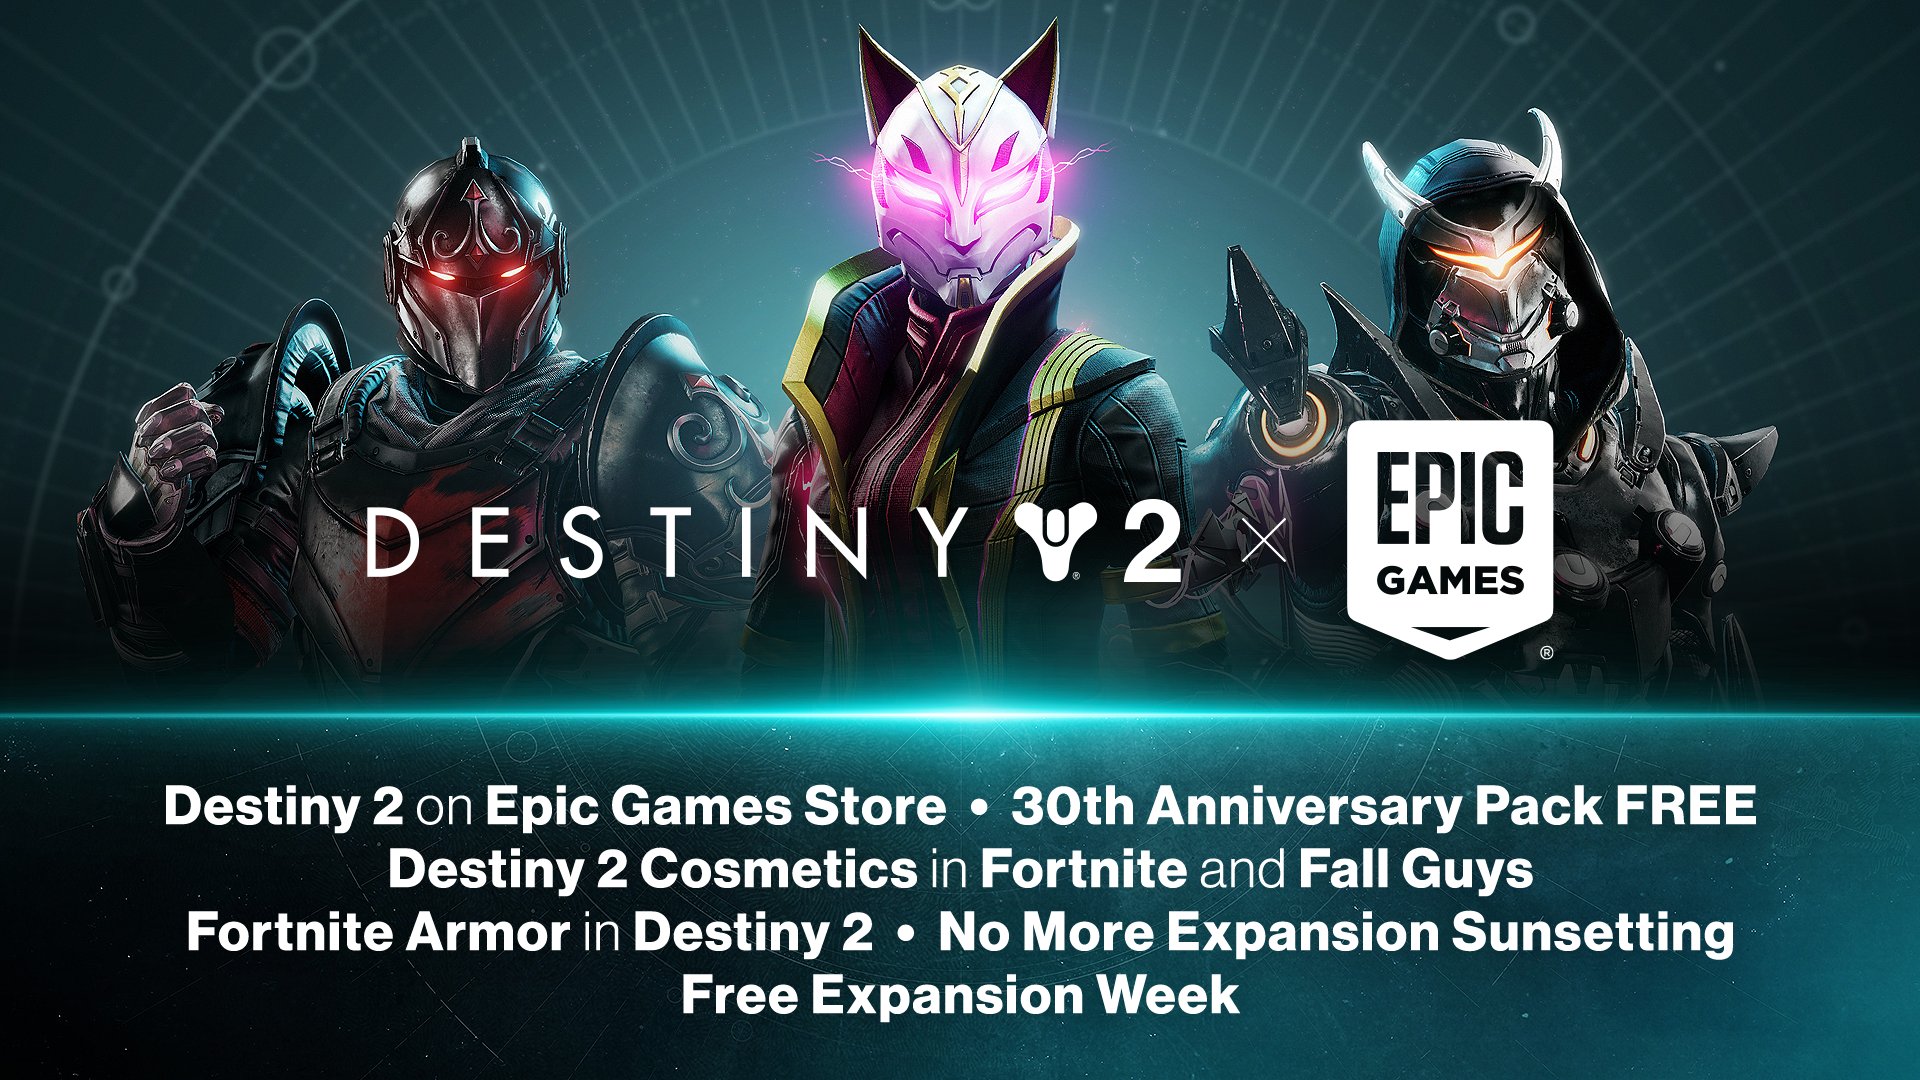 Destiny 2 arrives on Epic Games Store with free 30th Anniversary pack - The  Verge